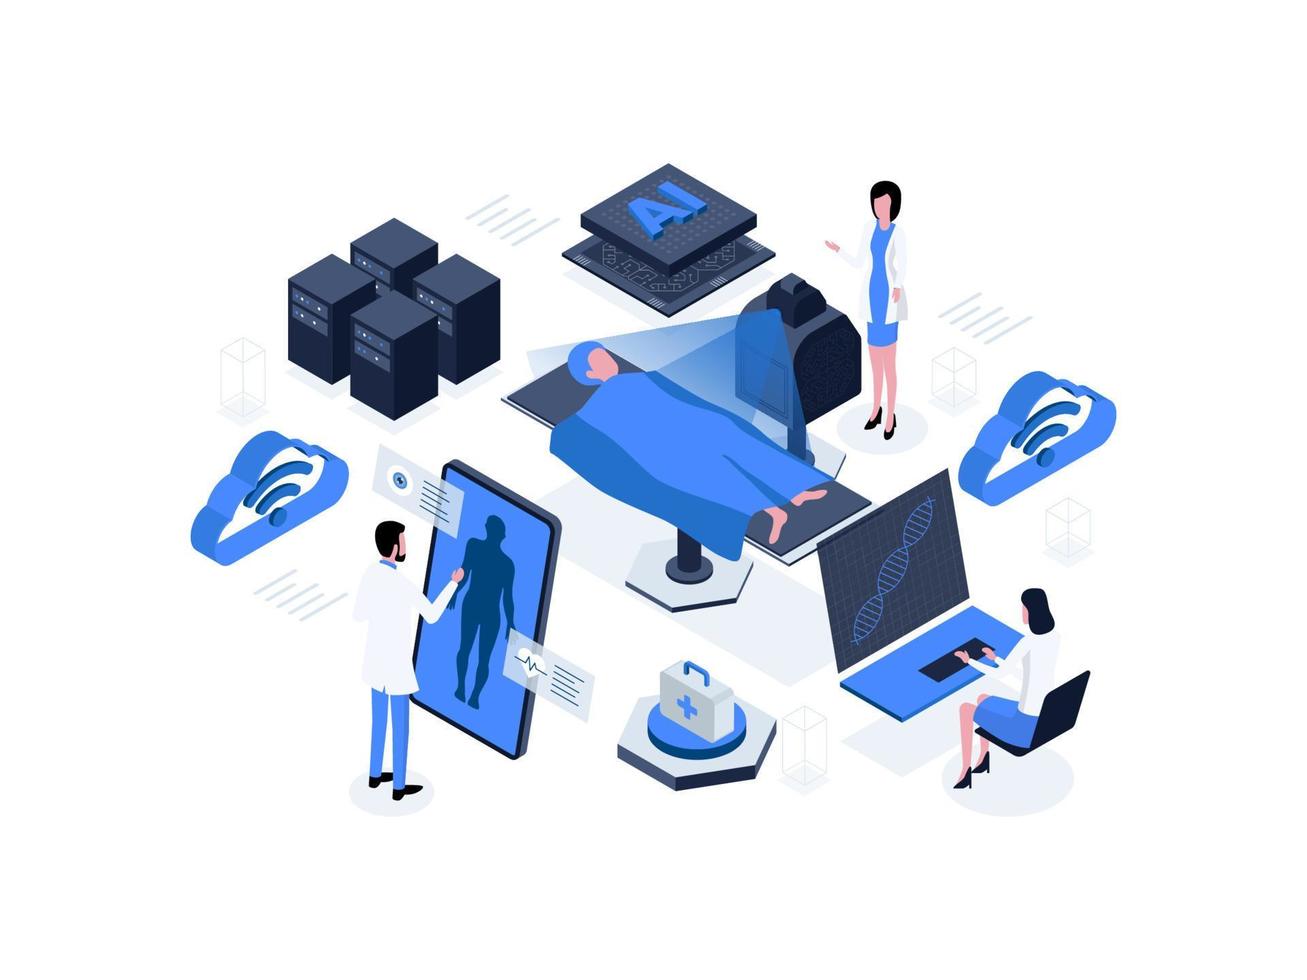 The innovative concept of healthcare involves an AI robot utilizing medical applications to examine a patient in a hospital. artificial intelligence in healthcare isometric illustration vector